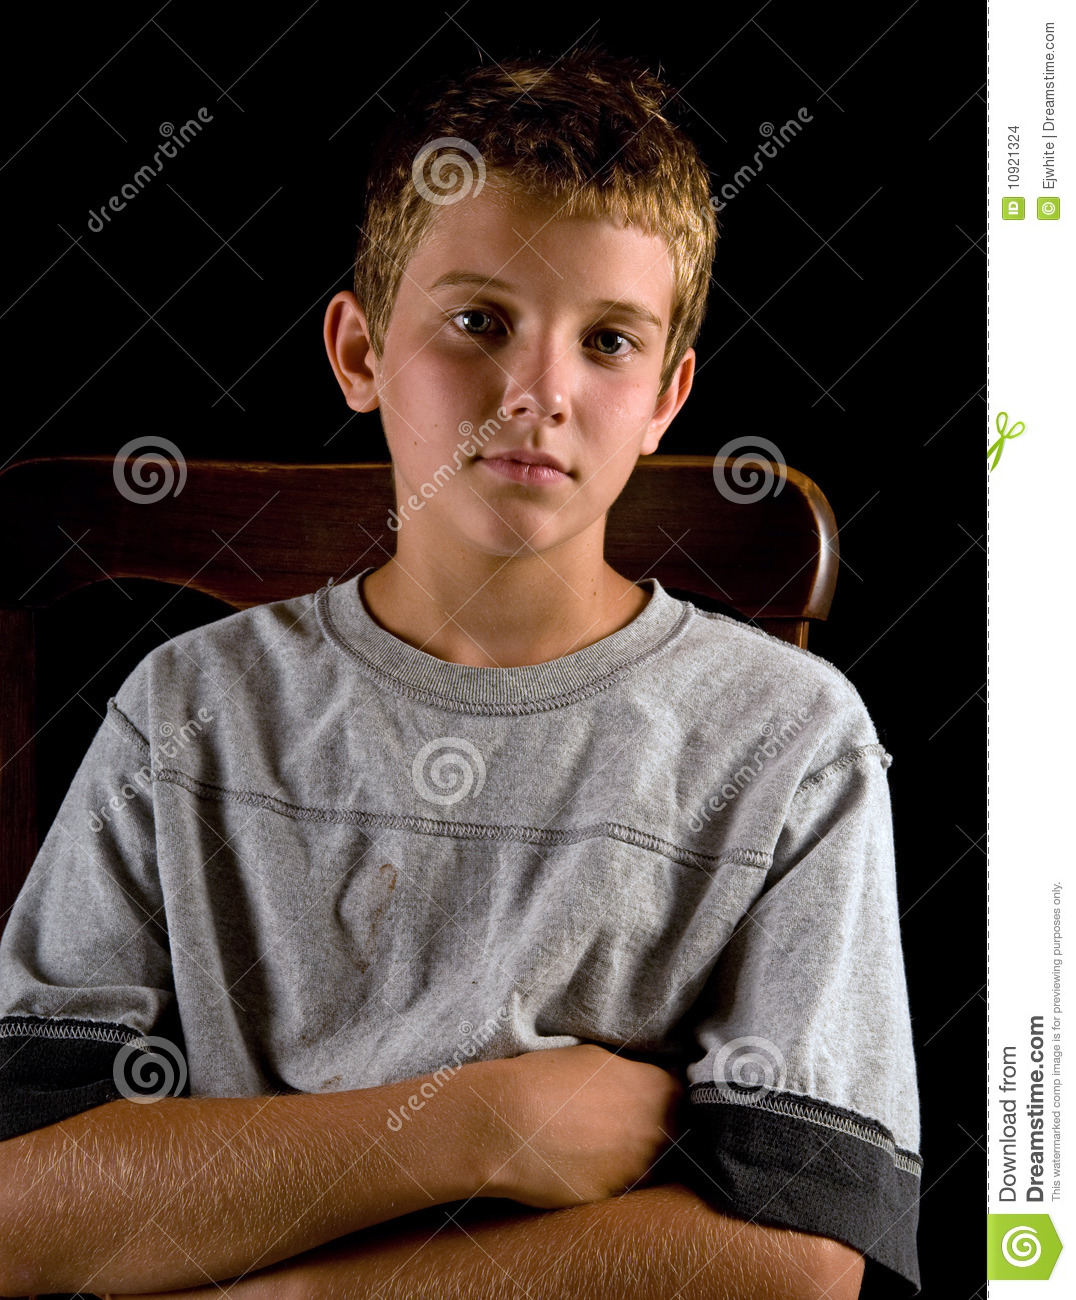 Serious Boy Stock Images   Image  10921324